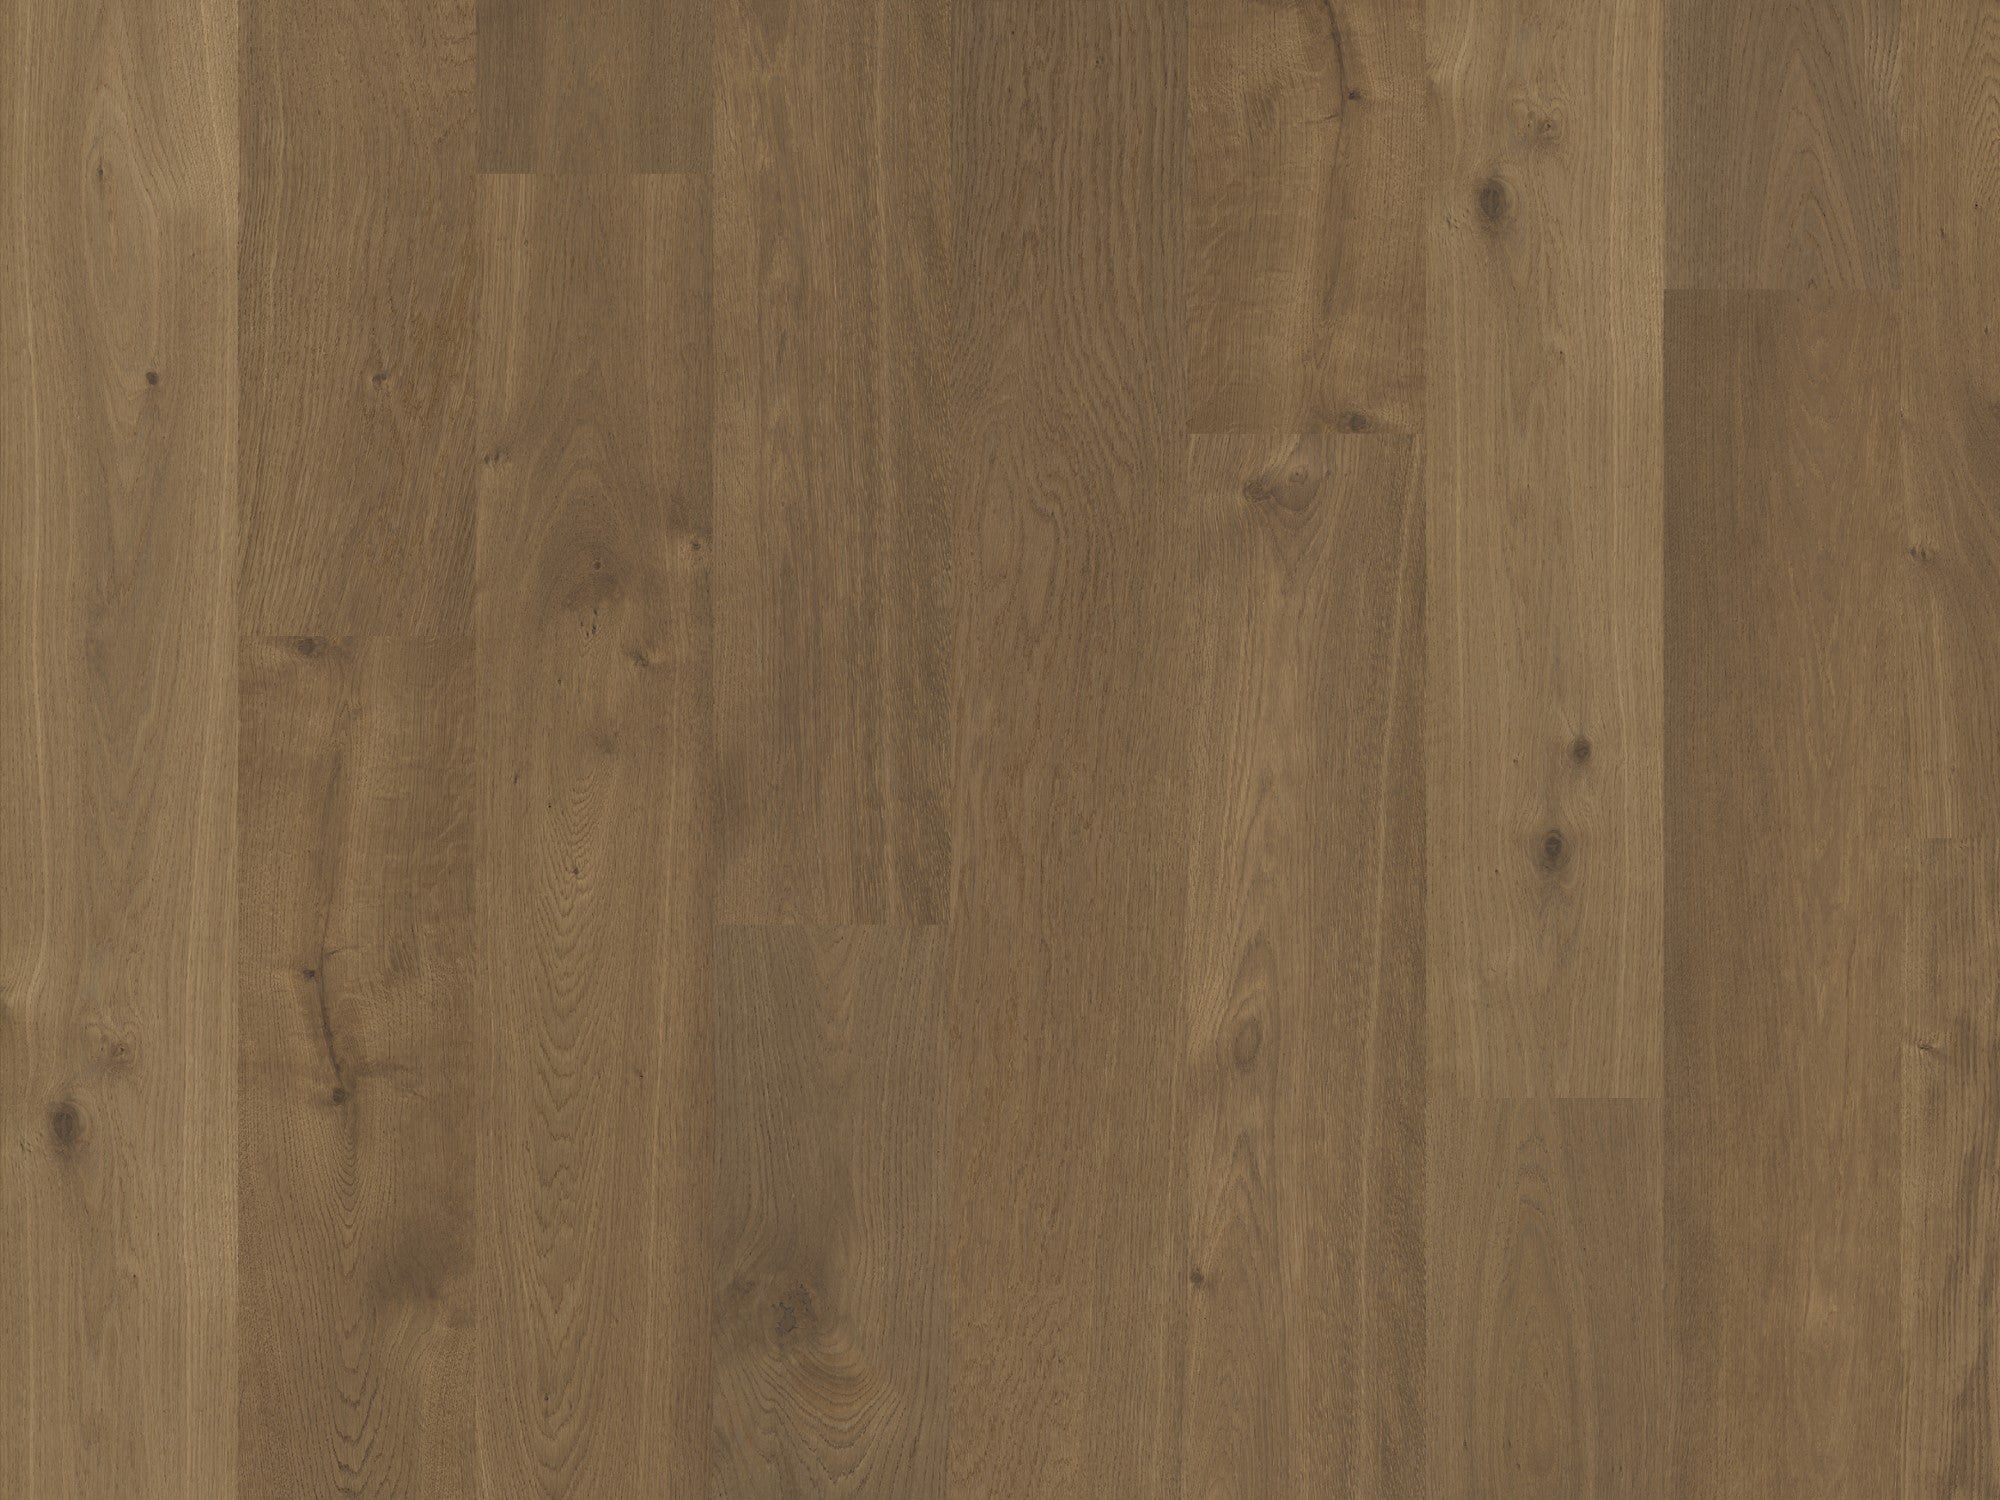 duchateau signature terra alpine european oak engineered hardnatural wood floor uv lacquer finish for interior use distributed by surface group international